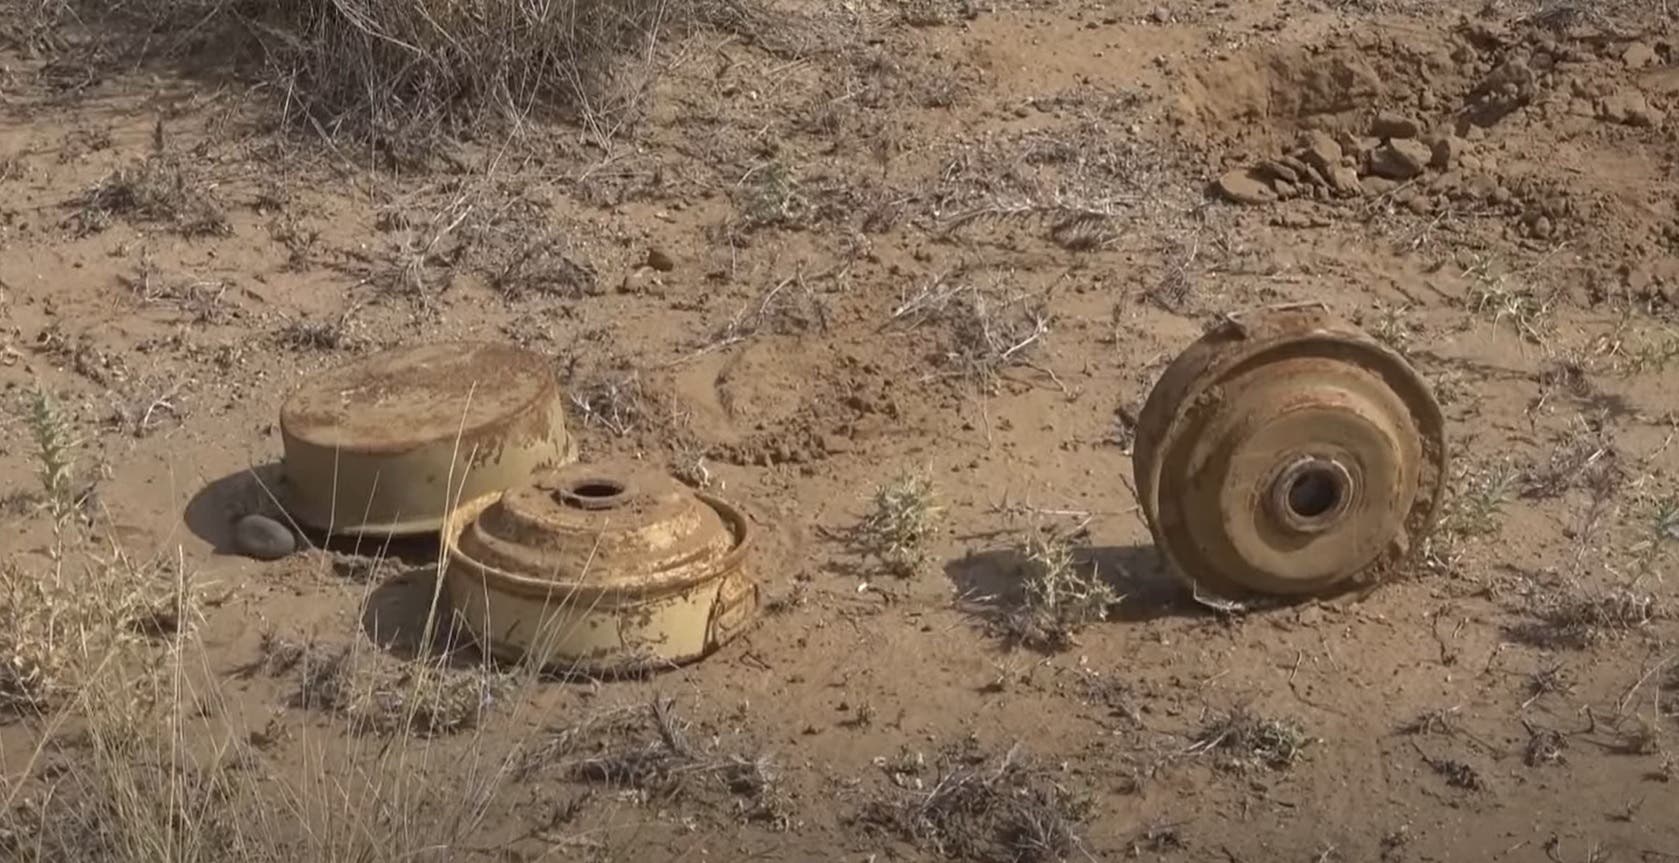 Houthi mines in Hodeidah (archive)